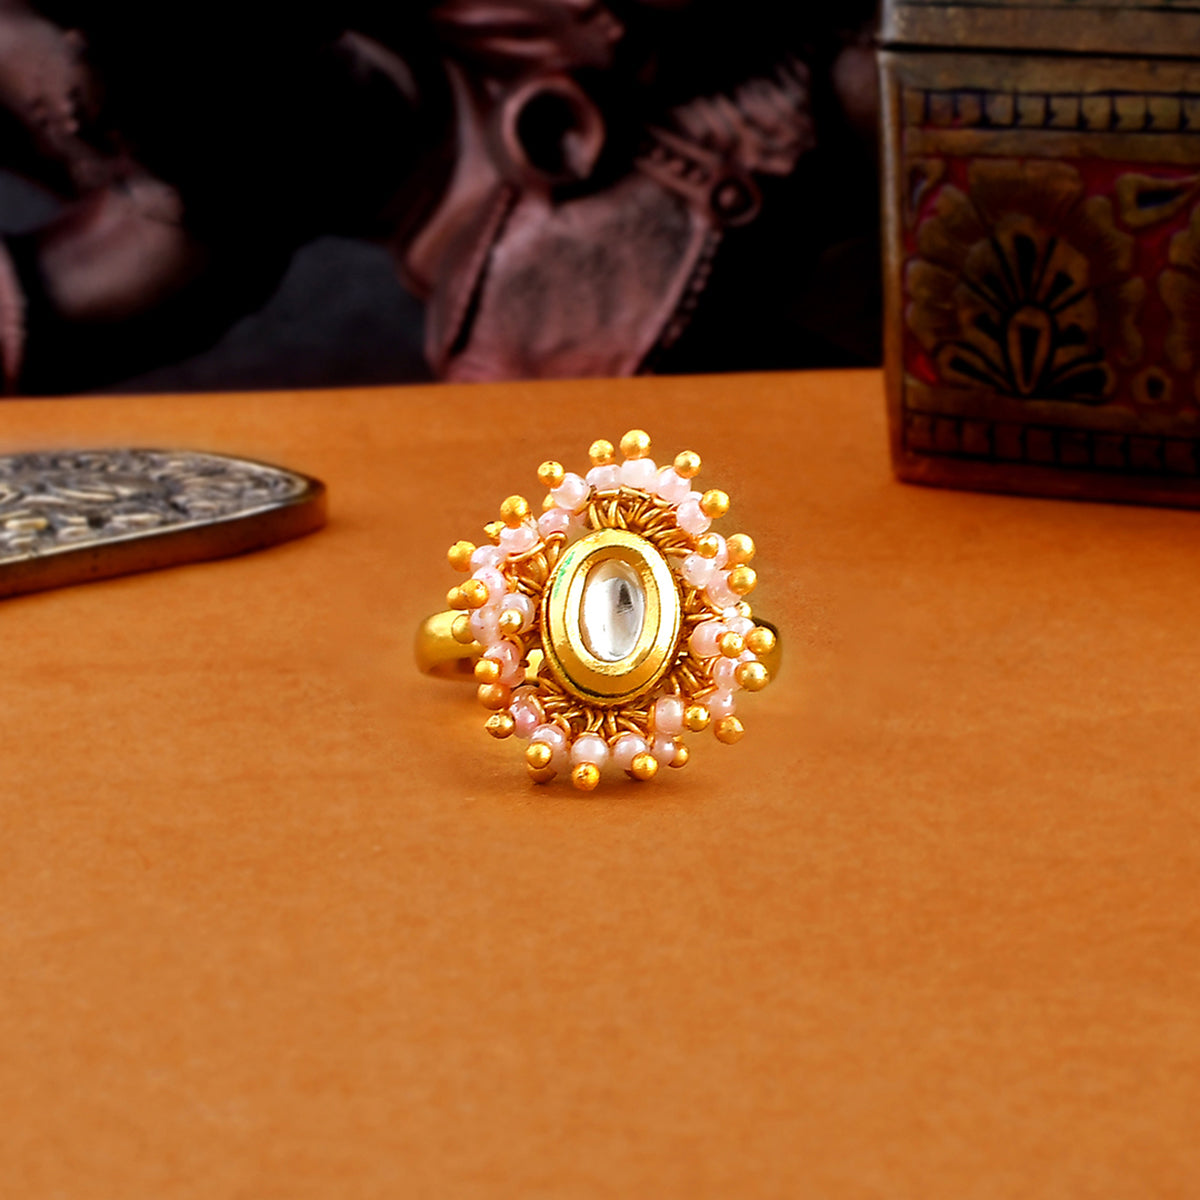 Handmade Gold Color Adjustable Ring with Kundan, Zircon and Mint Monalisa  Stone | Adjustable Rings for Women | Gift for Her | Indian Jewelry – Kaash